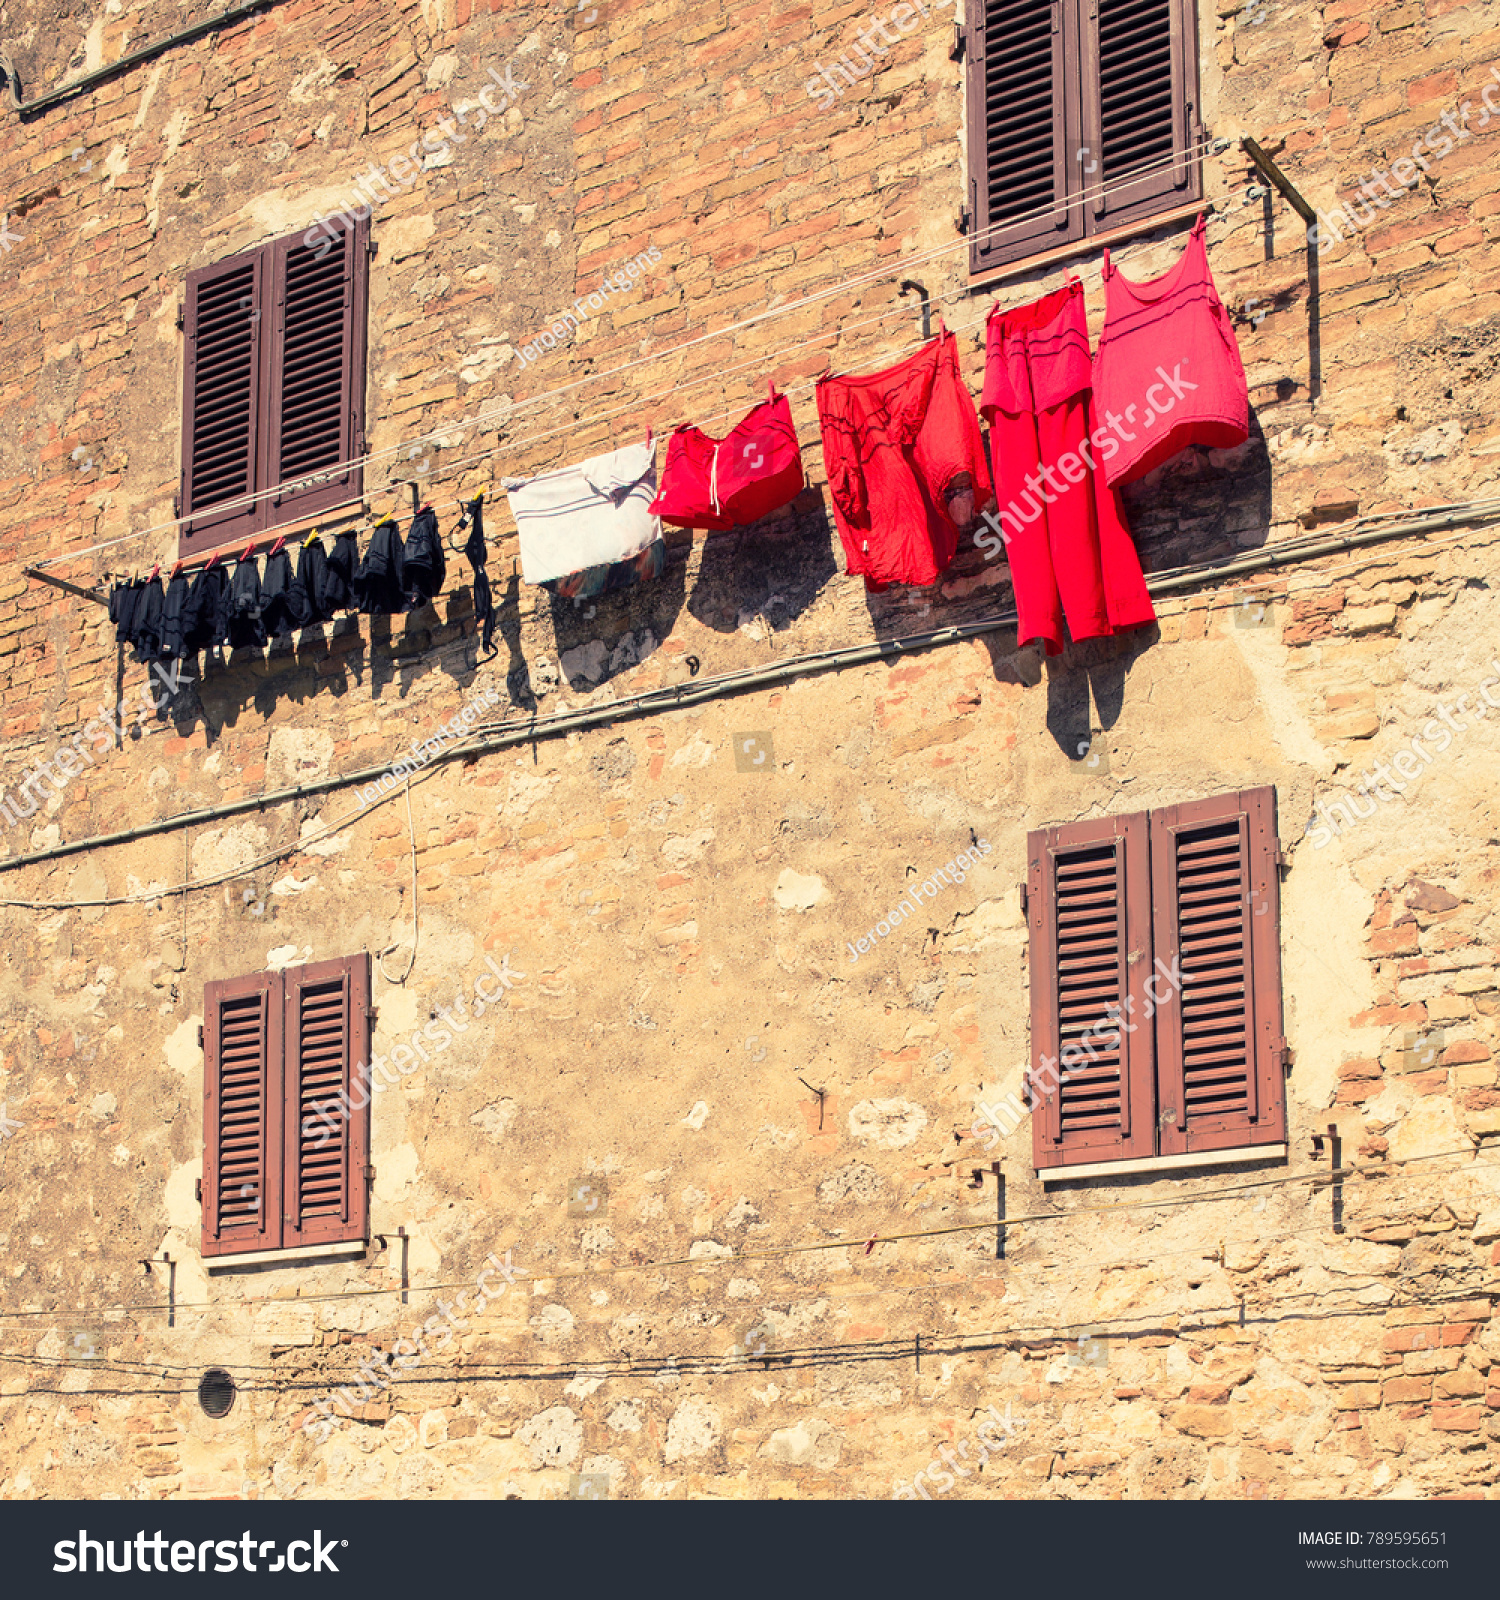 Laundry, sorted by color drying in the sun against an old brick wall and closed shutters. #789595651